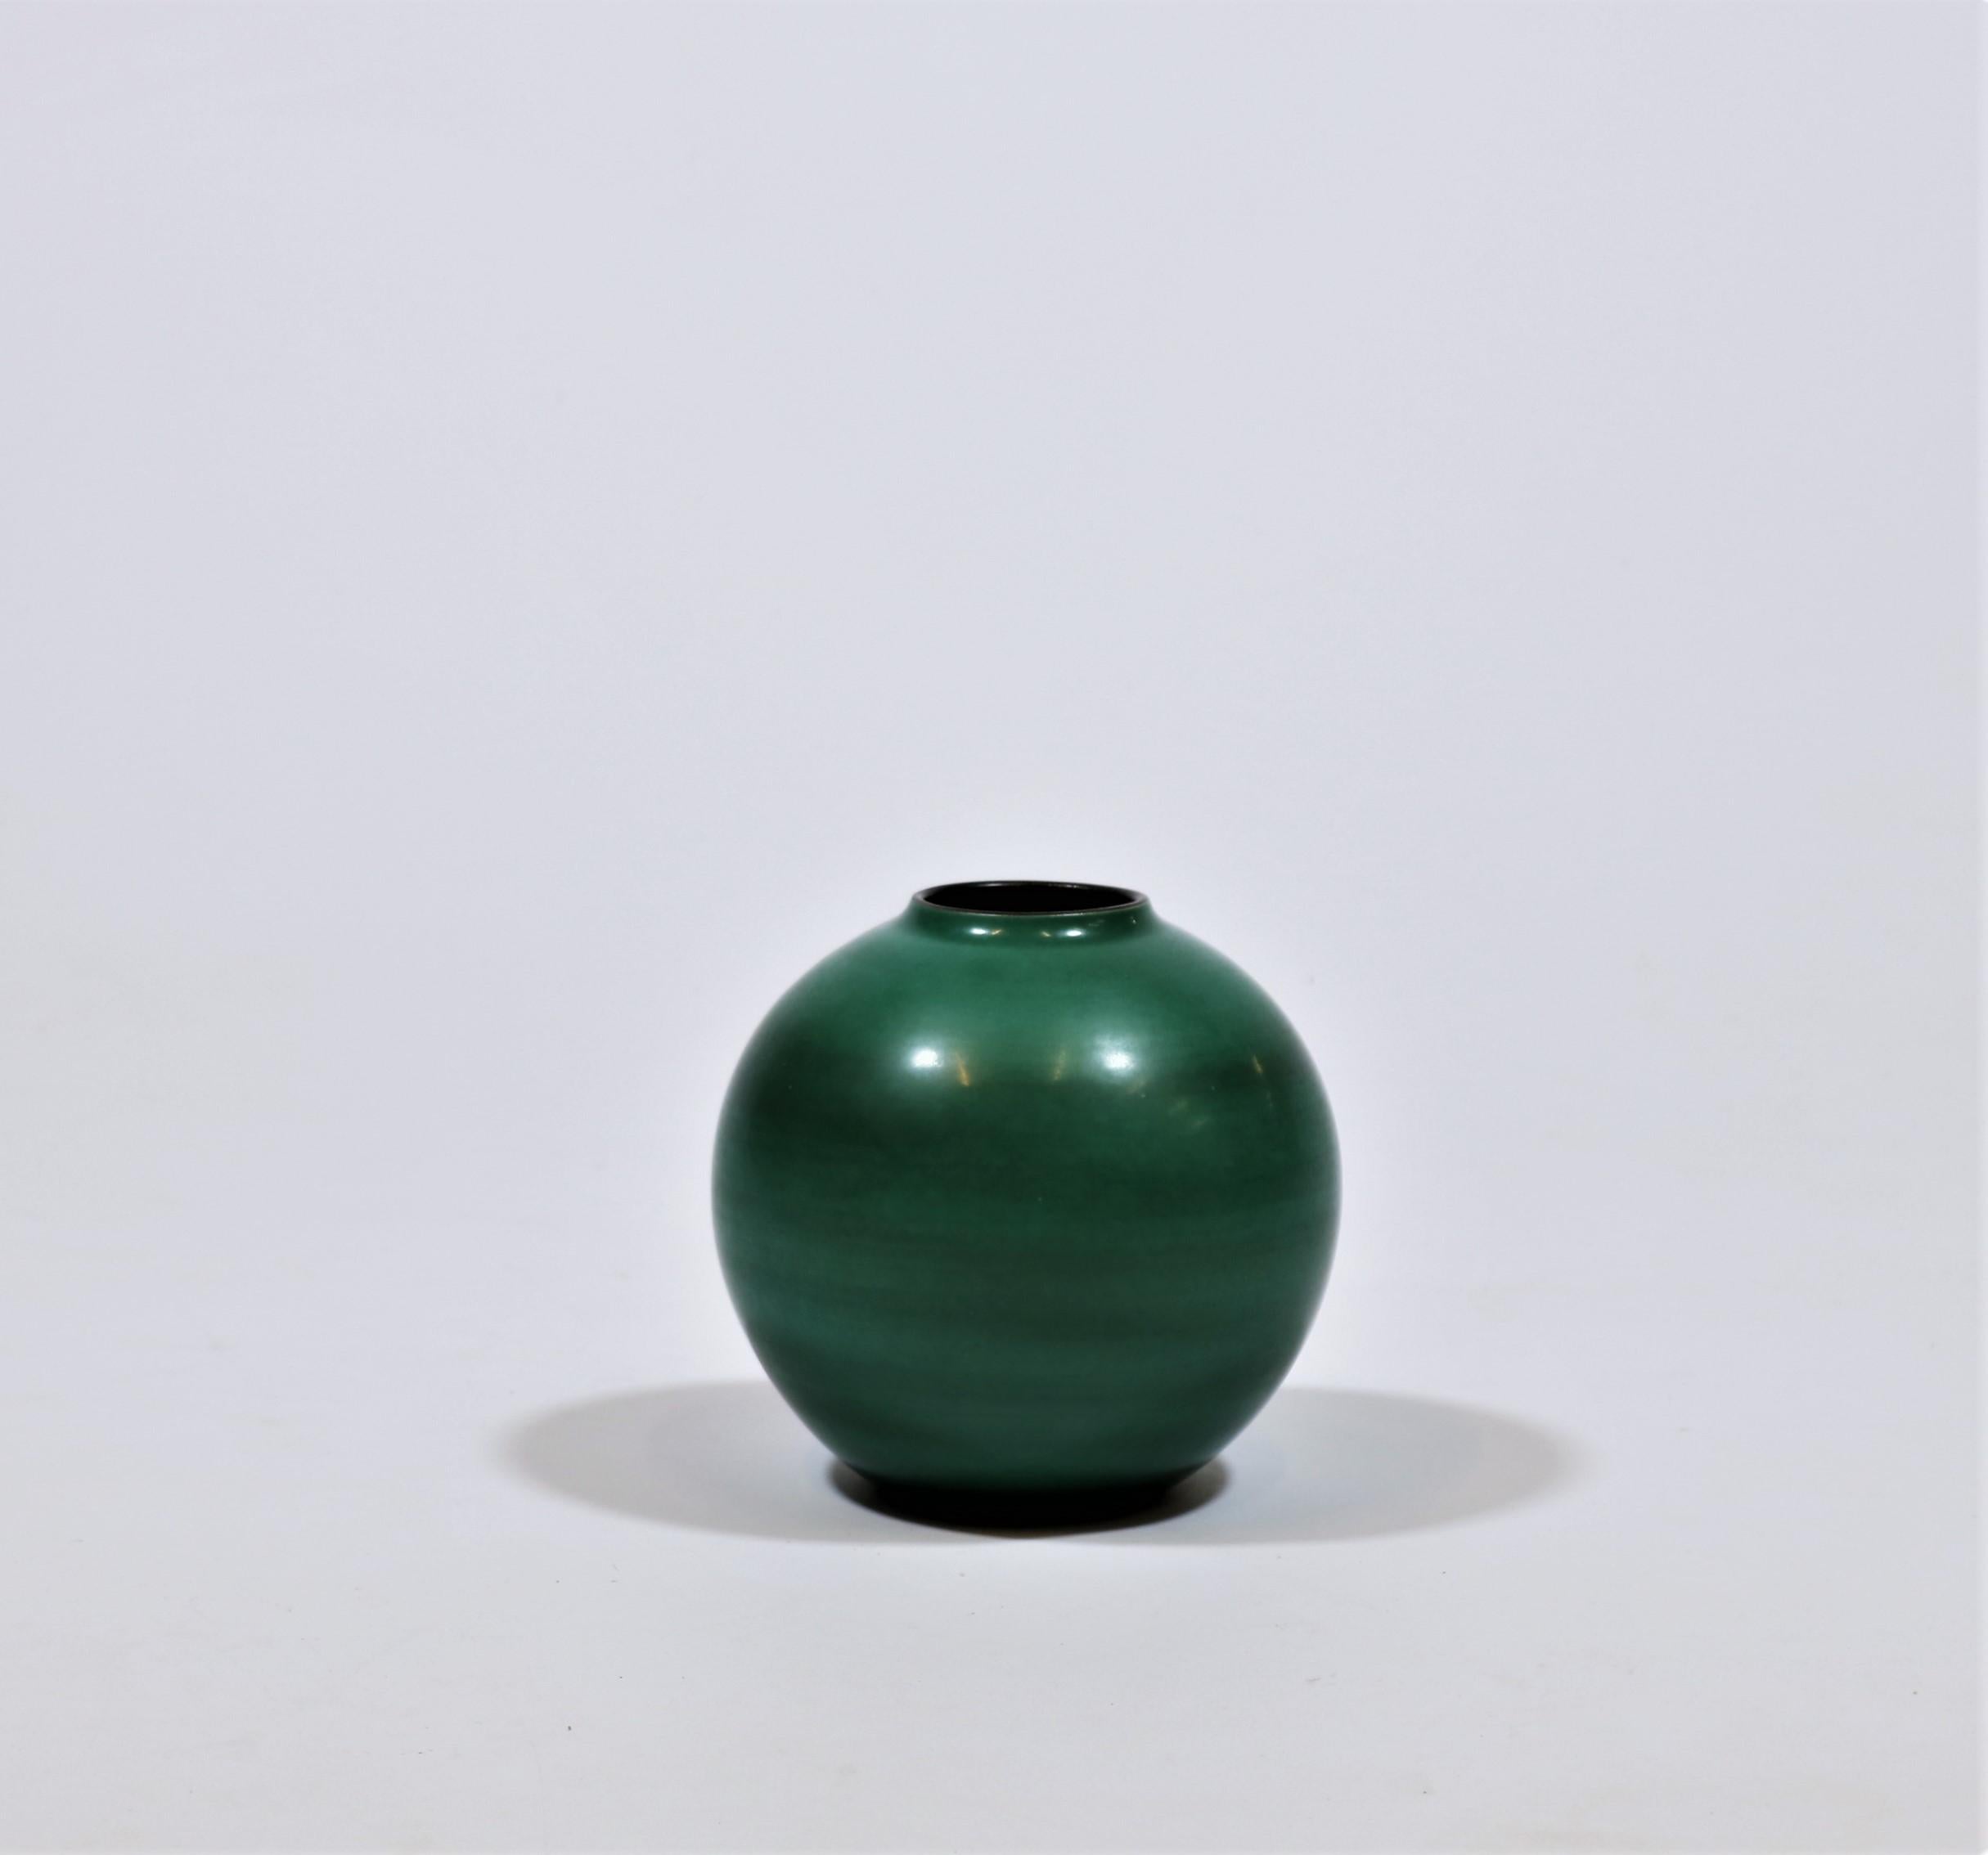 Elegant and organic shaped vase in green shades handmade by Nils Thorsson at Royal Copenhagen, Denmark in 1944.
Due to shortage of materials during WWII the Danish Royal Stoneware Factory (Royal Copenhagen) had to use local raw materials which is